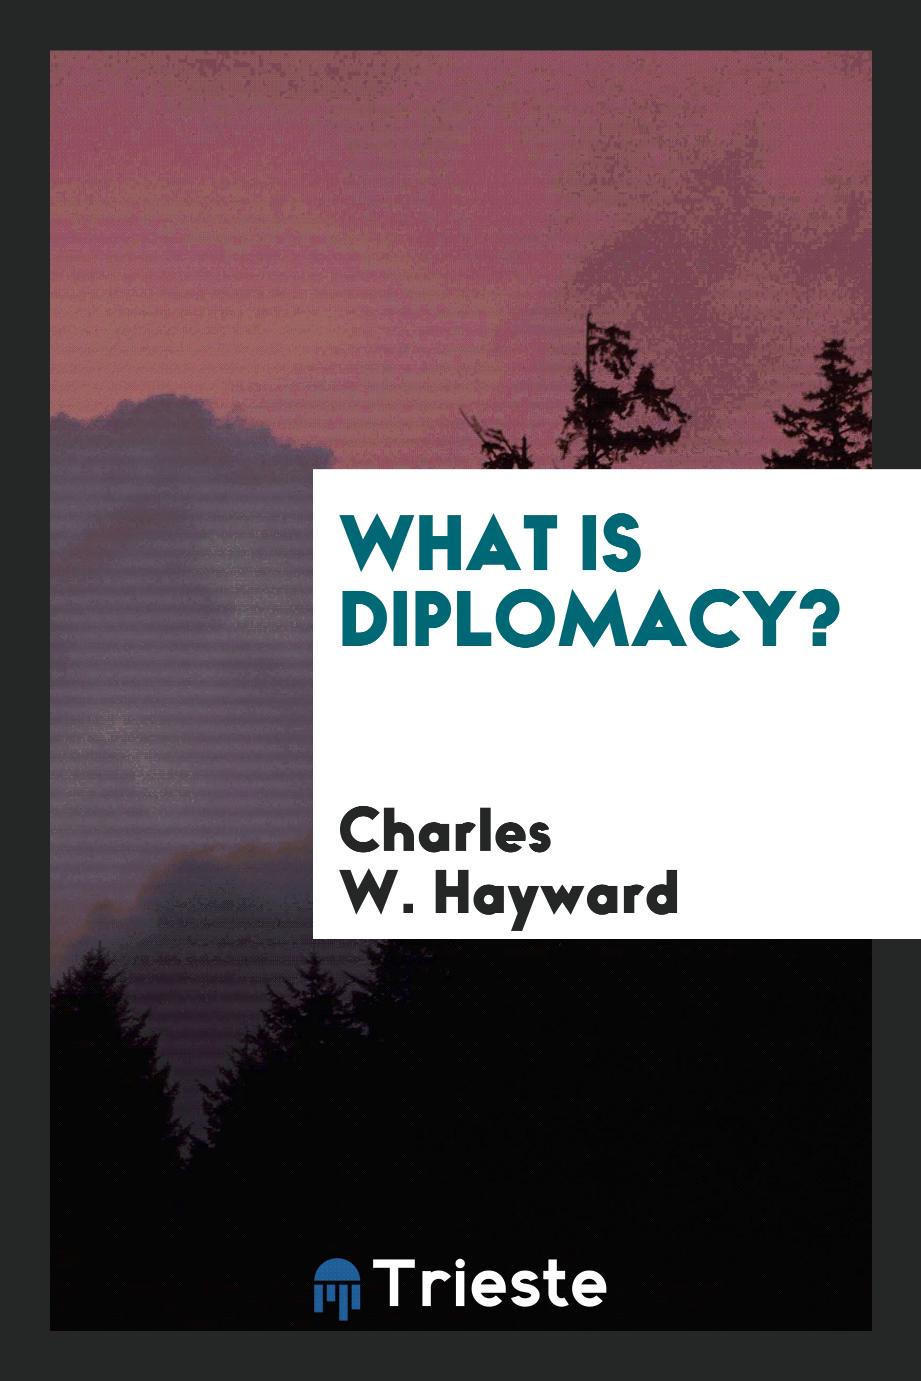 What is diplomacy?